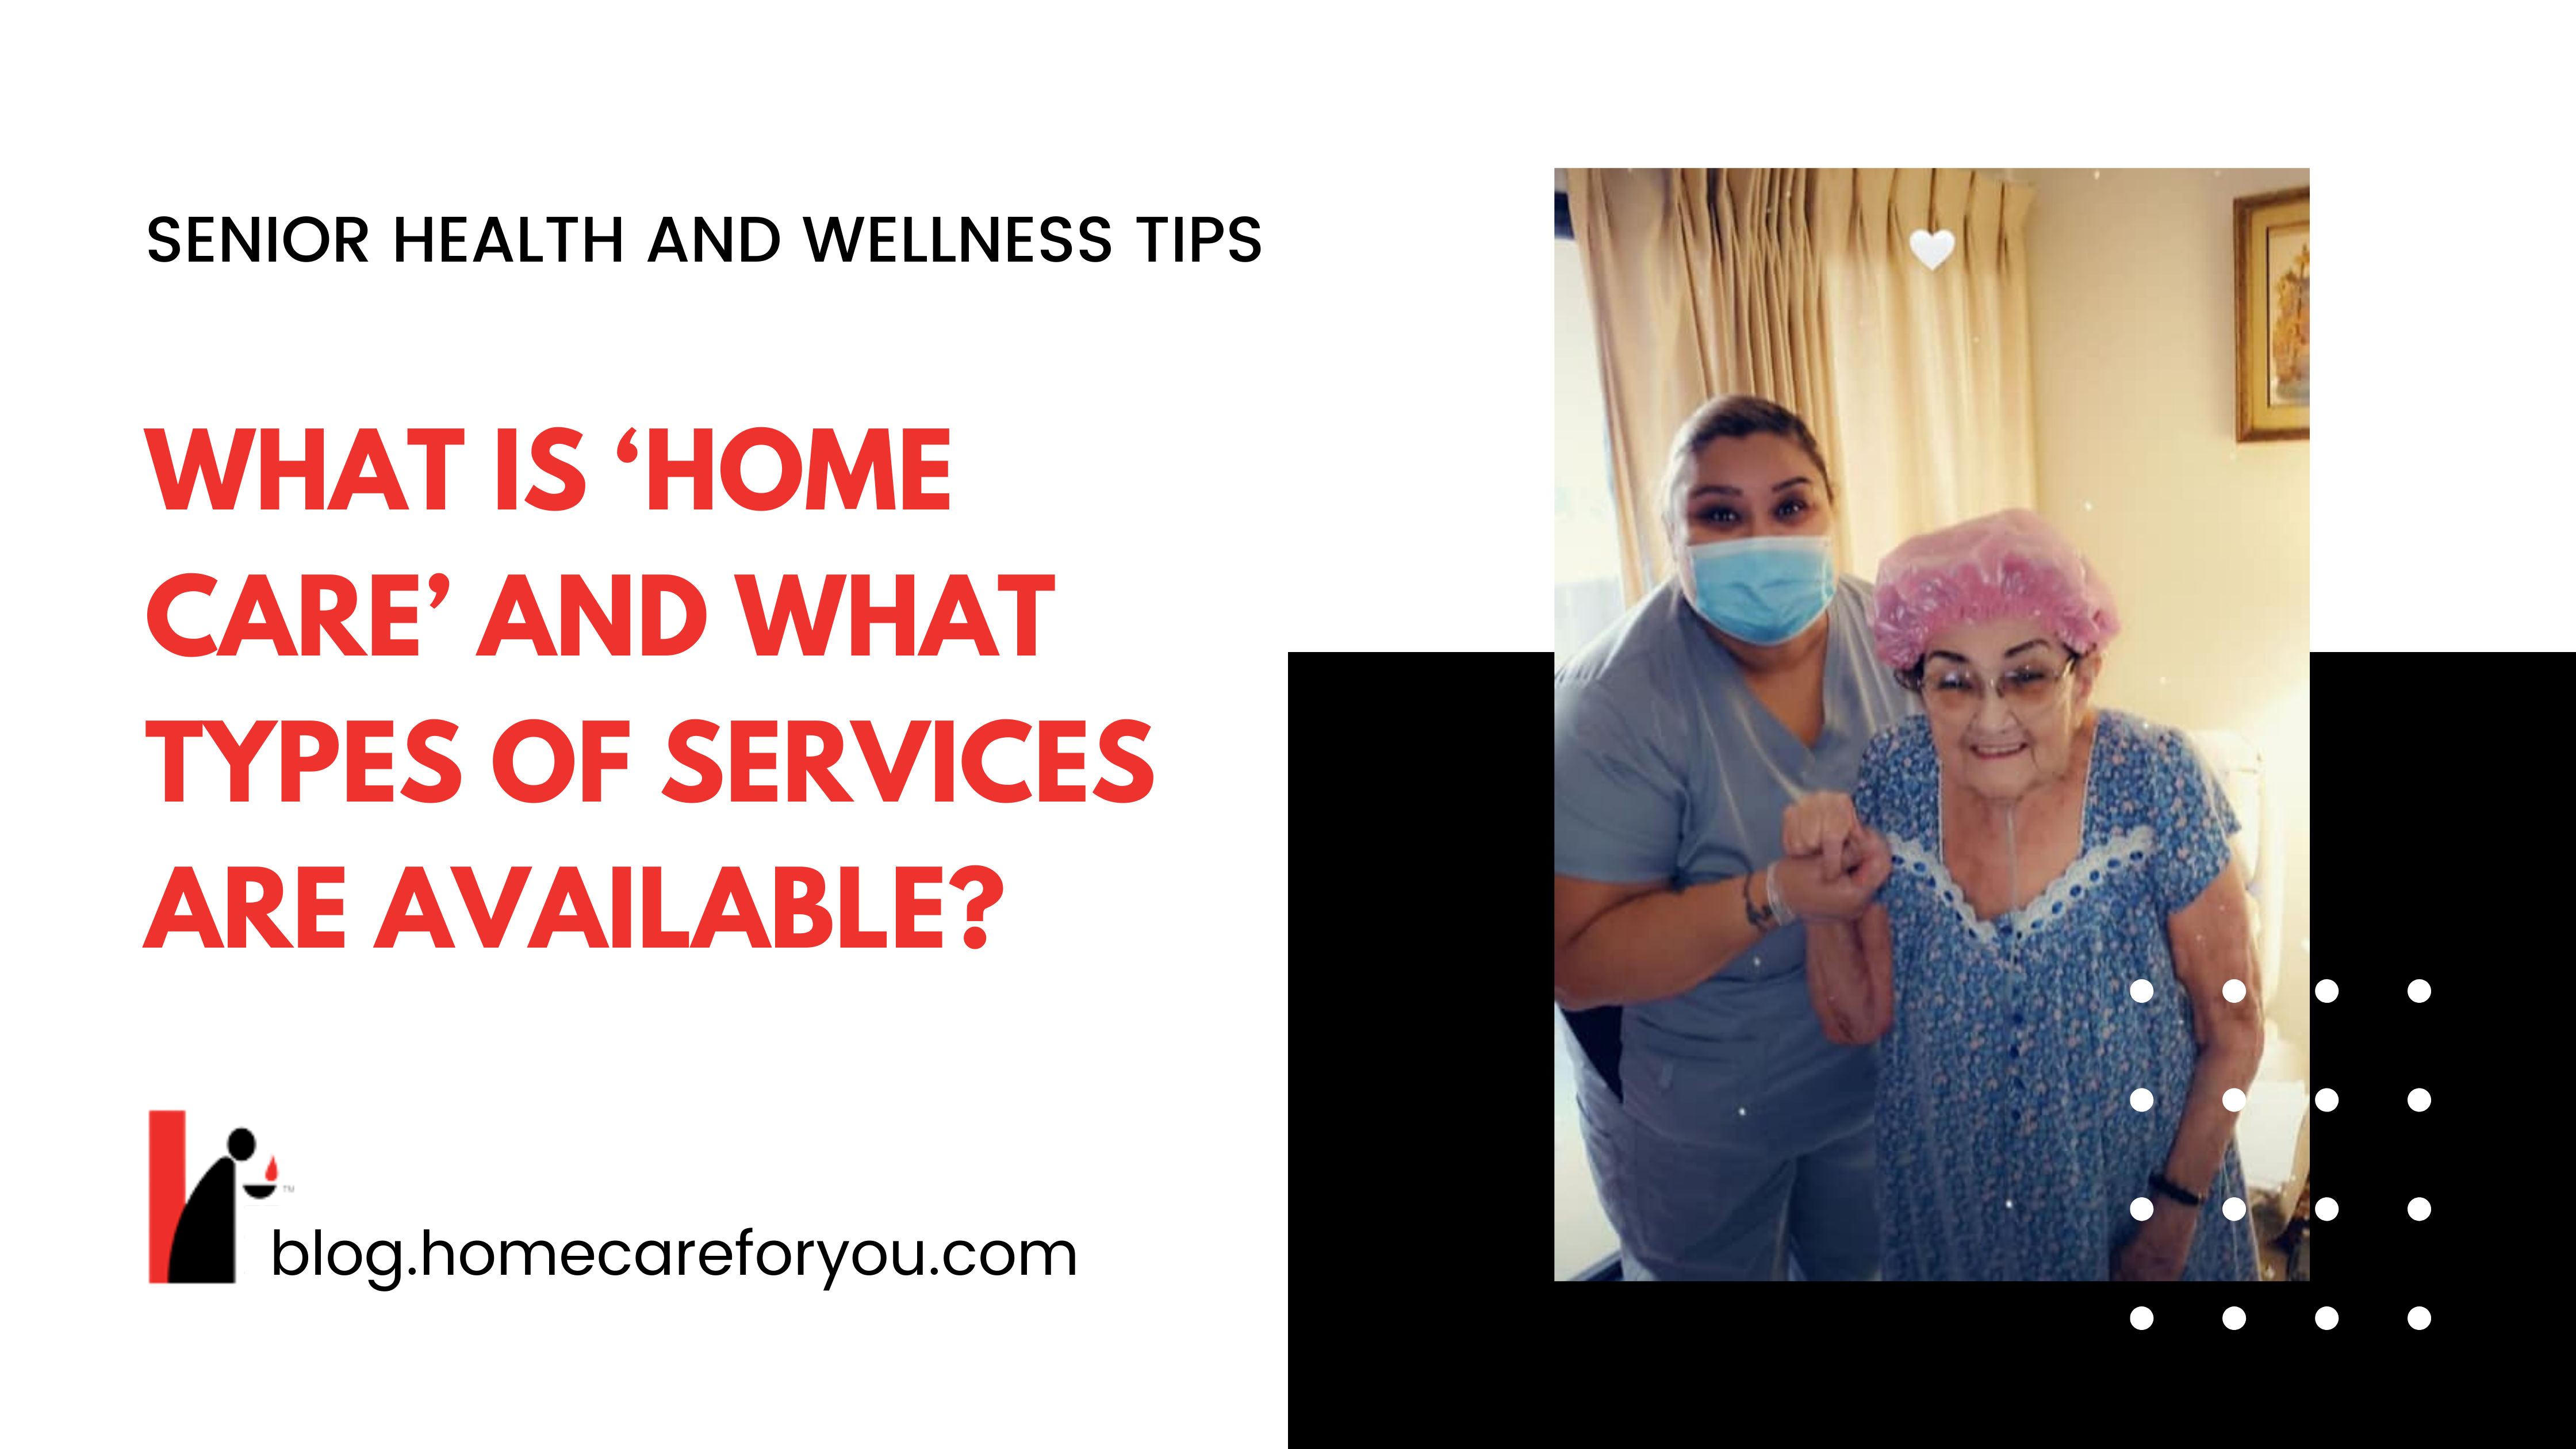 What is Home Care and What Types of Services are Available?